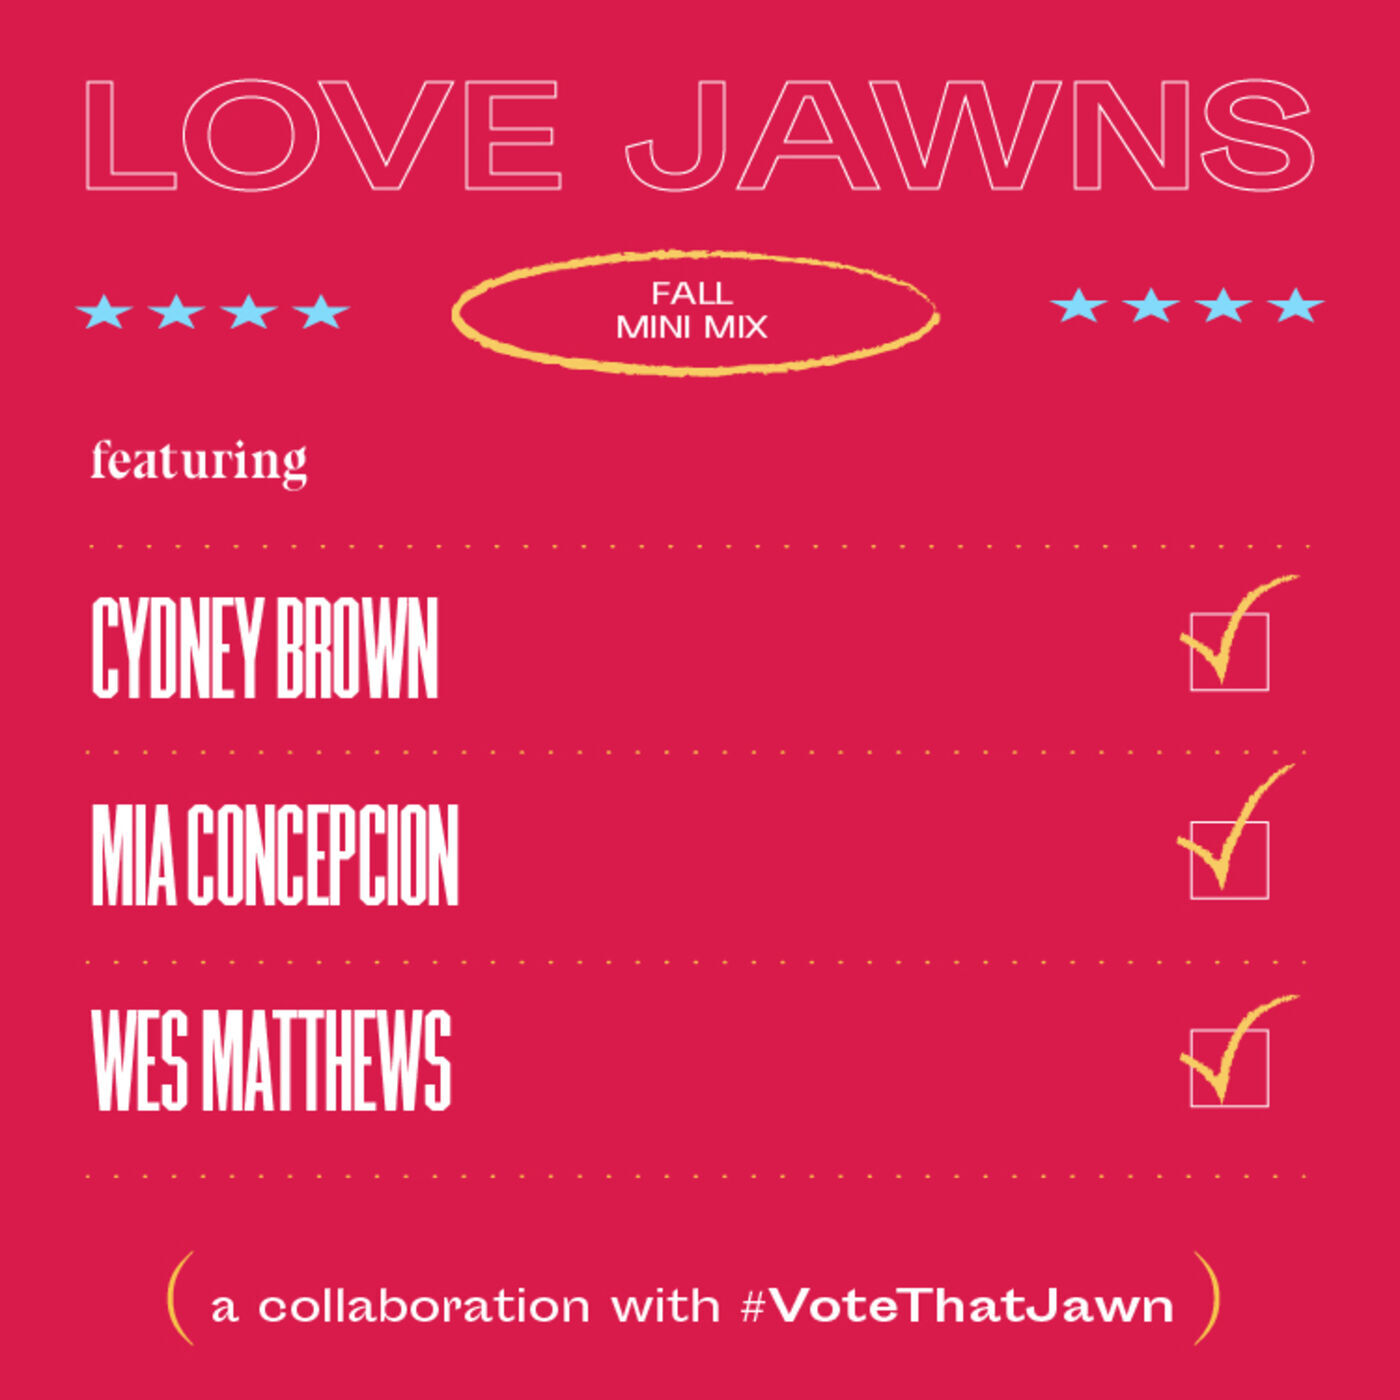 a love jawns mini mix playlist cover that says "Love Jawns Fall Mini Mix featuring Cydney Brow, Mia Concepcion, Wes Matthews, a collaboration with #VoteThatJawn"